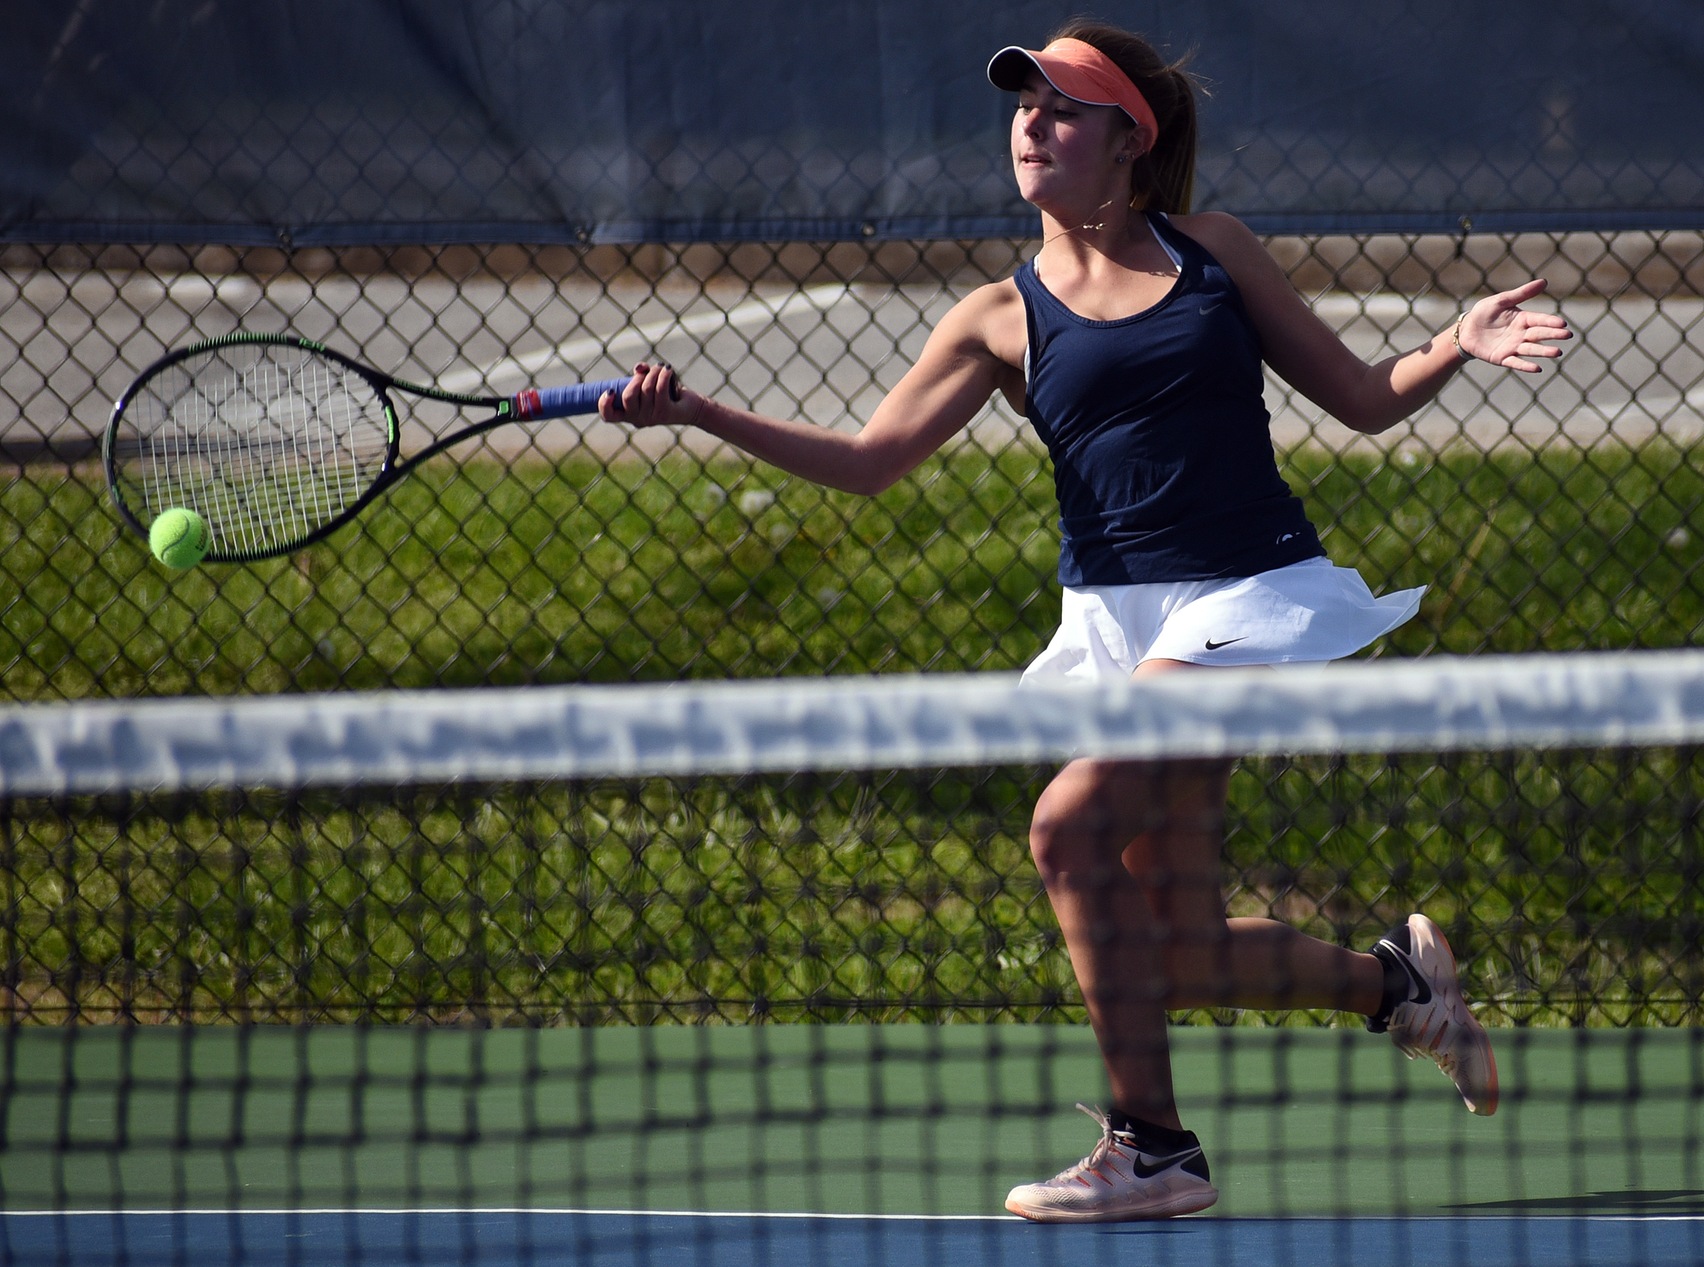 Price, Resende defeat ranked opponents in season debut at Wingate Invitational